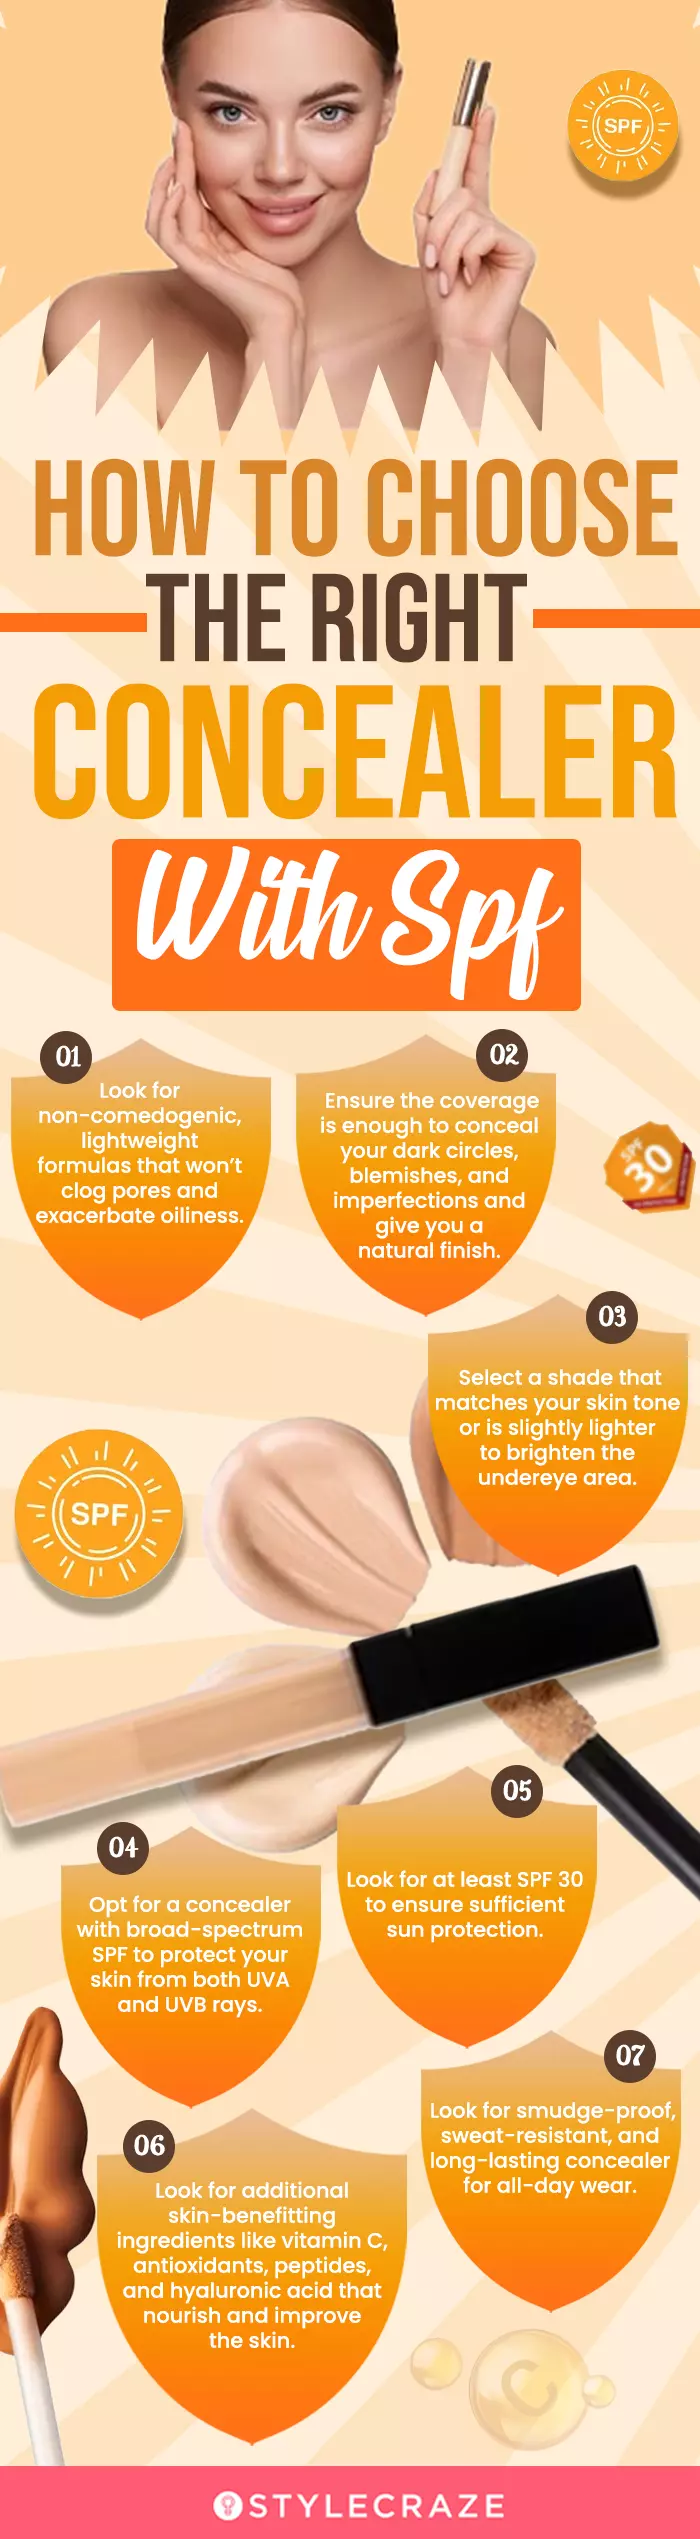 How To Choose The Right Concealer With SPF (infographic)